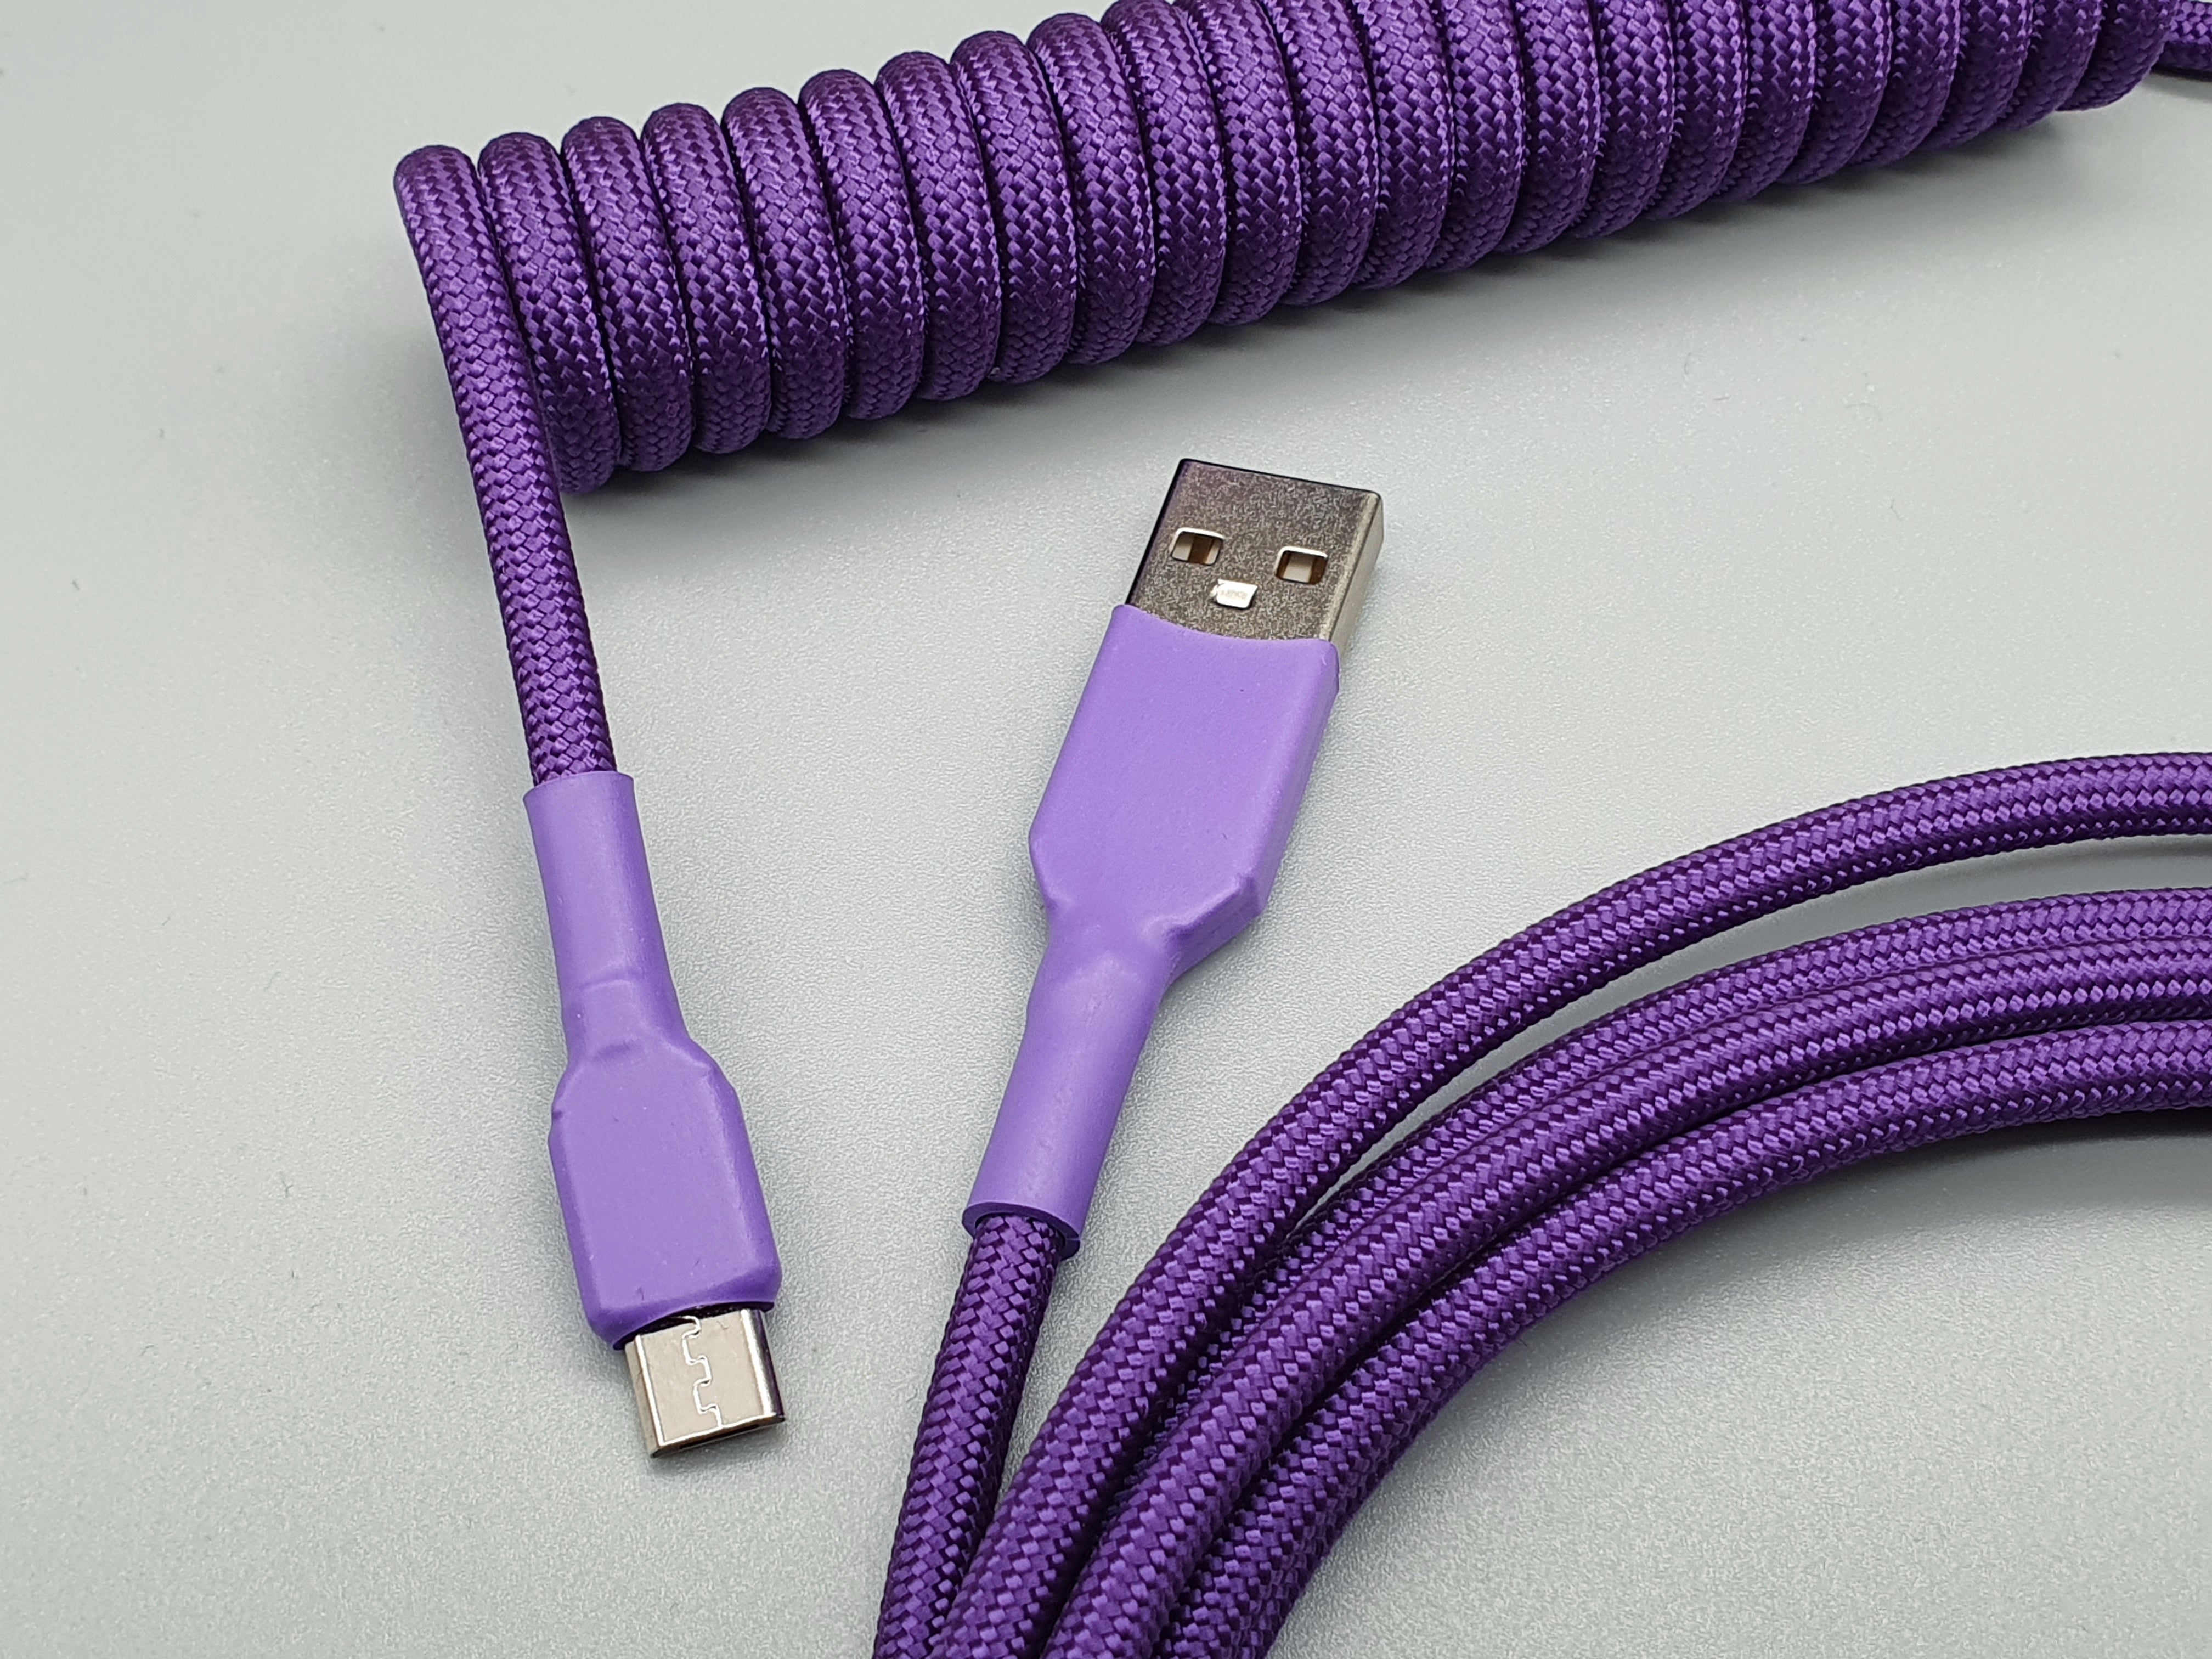 Complete Cables